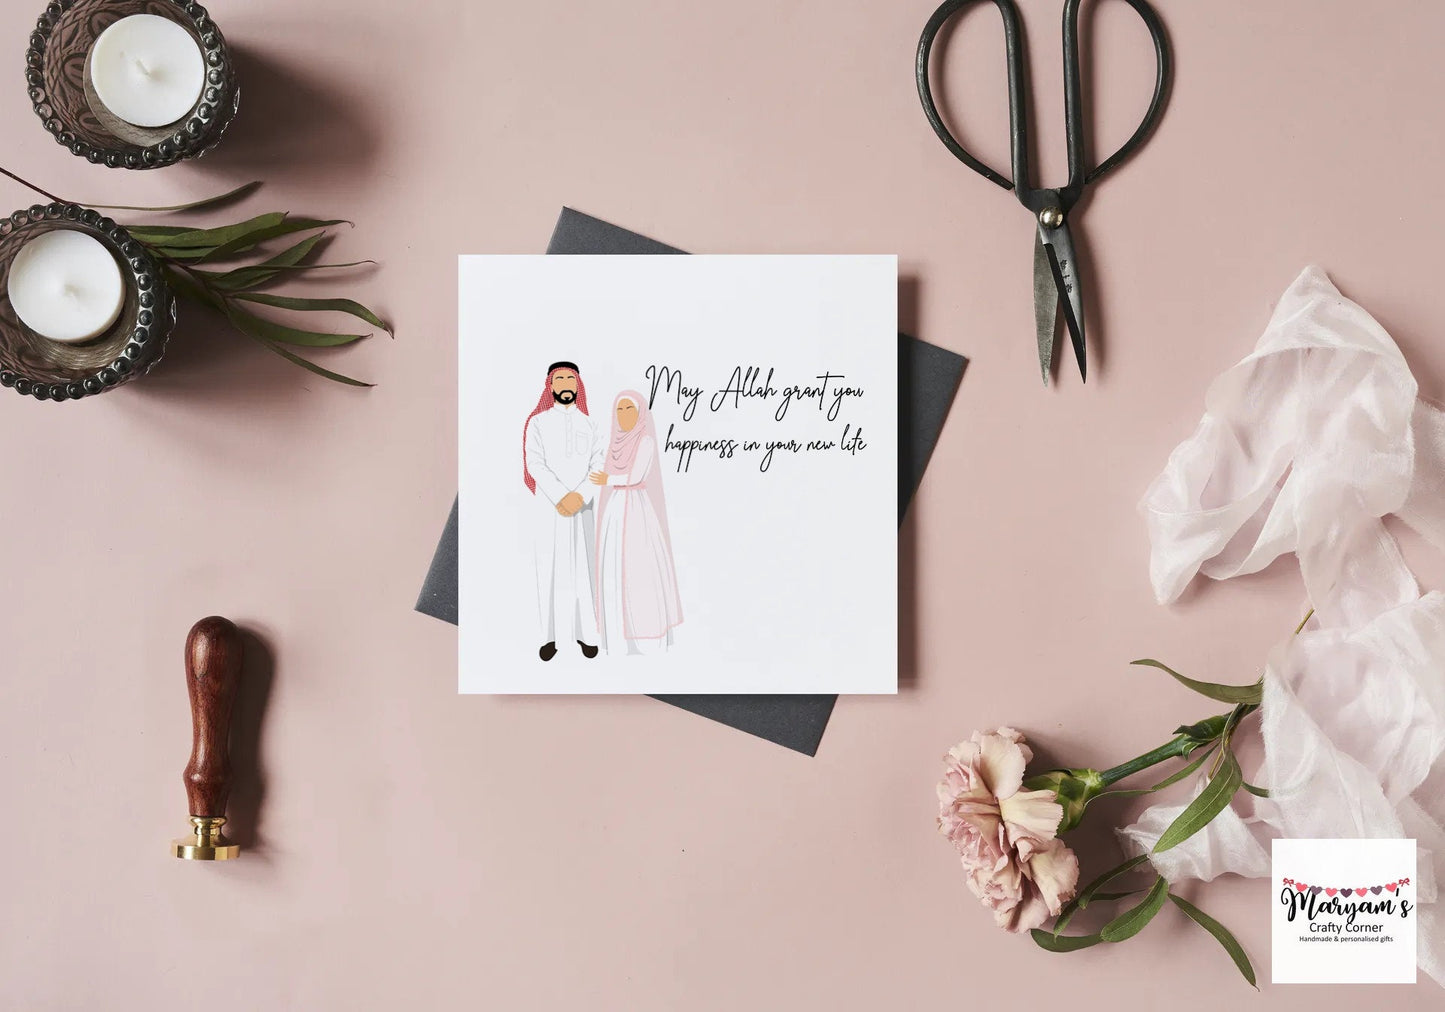 May Allah Grant you happiness in your life, islamic greeting card, muslim couple greeting card